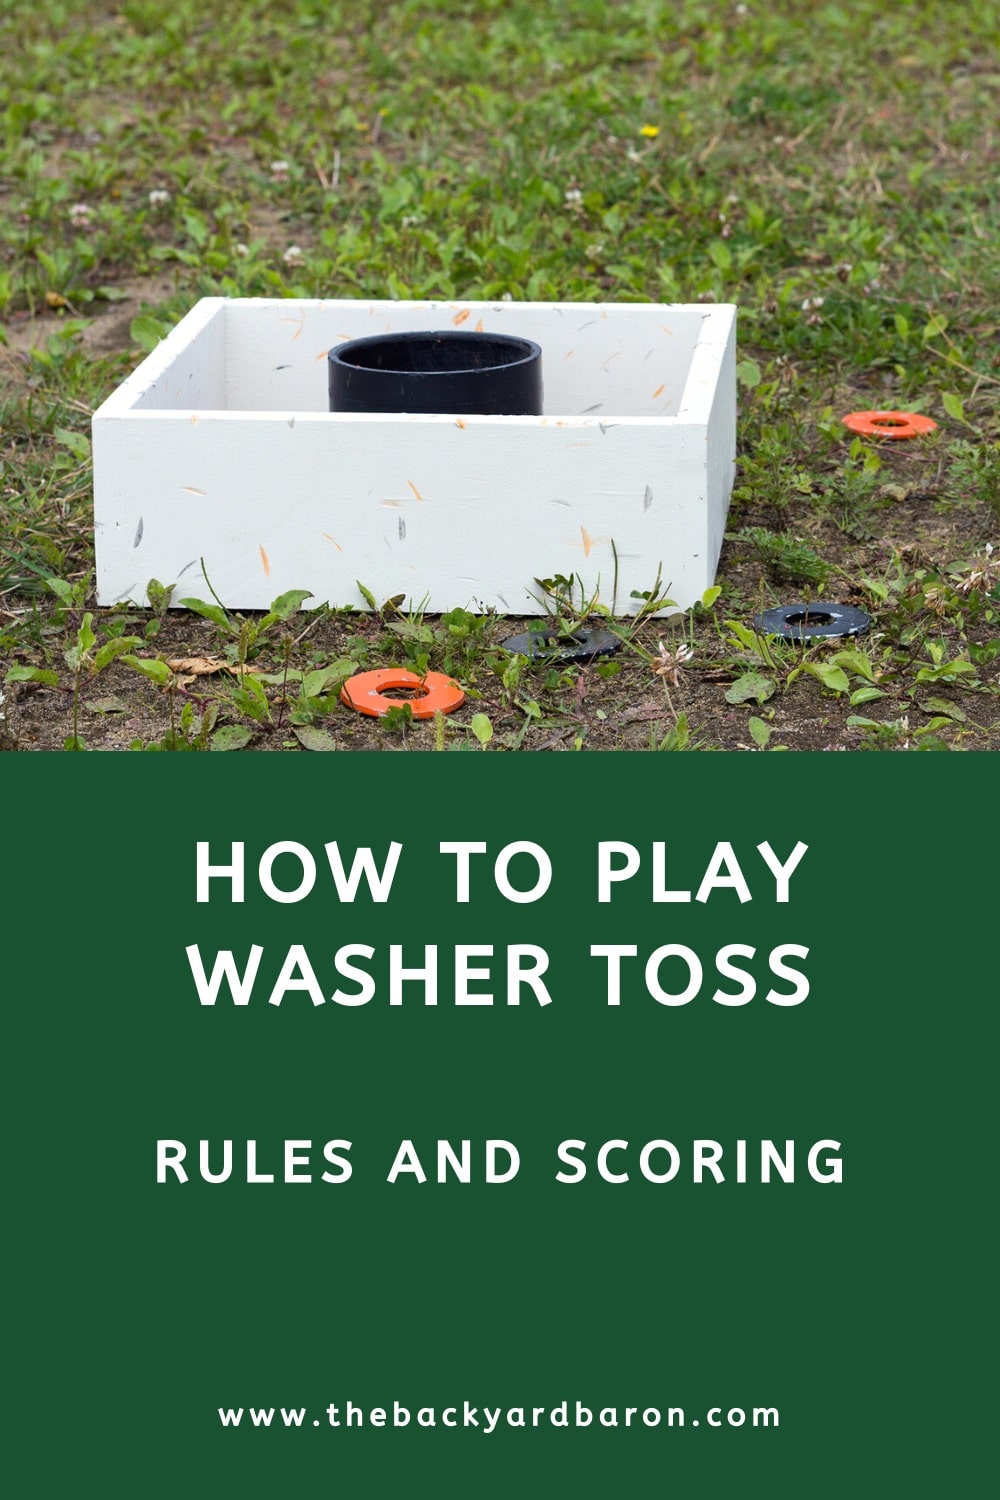 How to play washer toss (beginners guide)